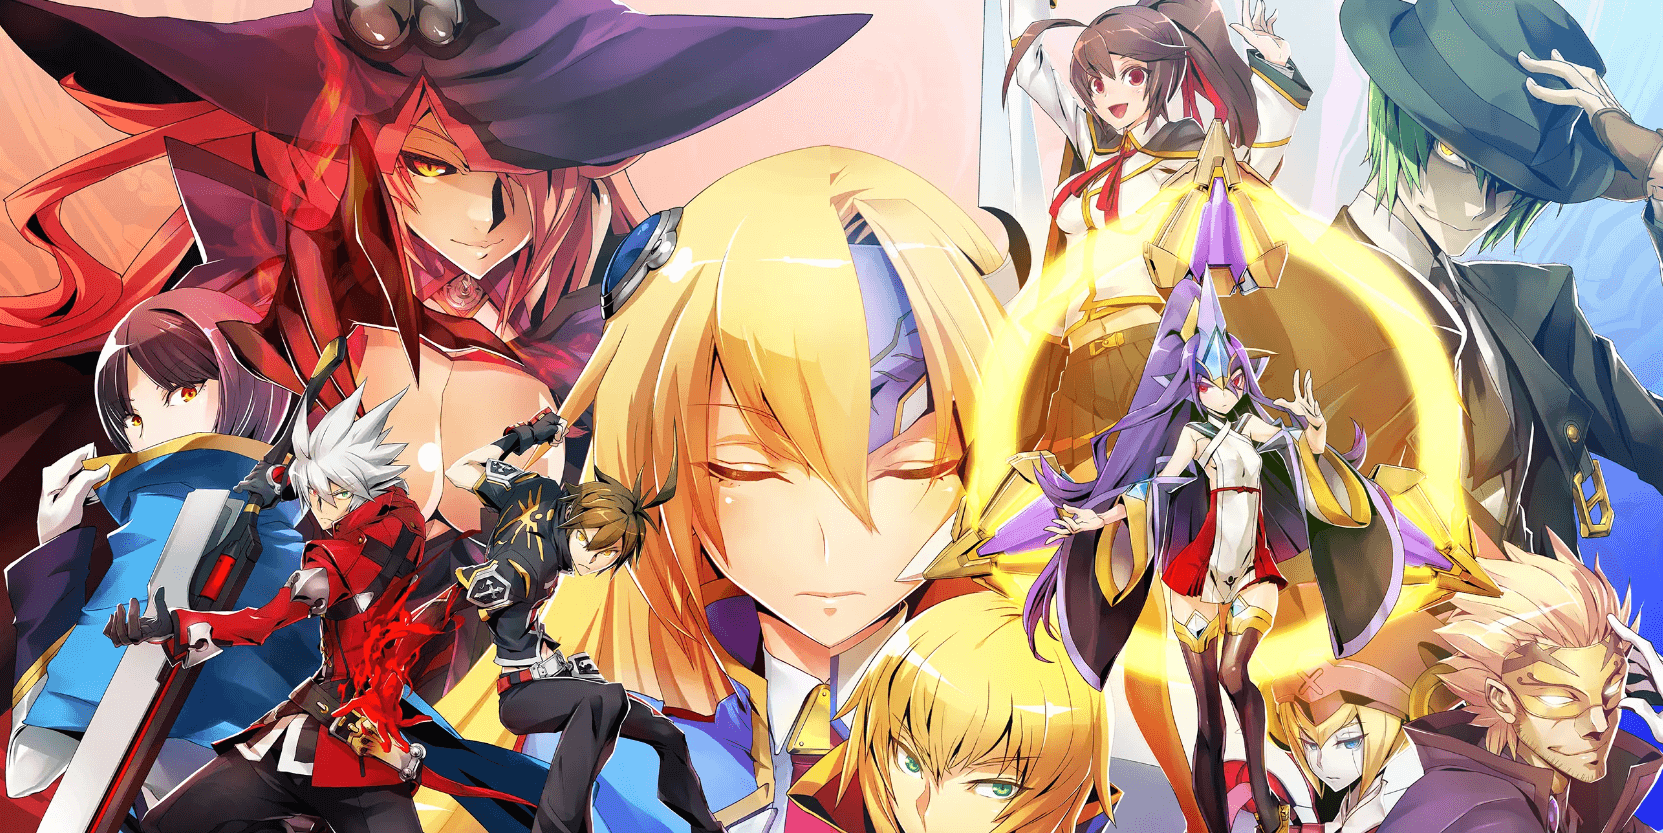 New BlazBlue Authorized Roguelike Game Announced In China